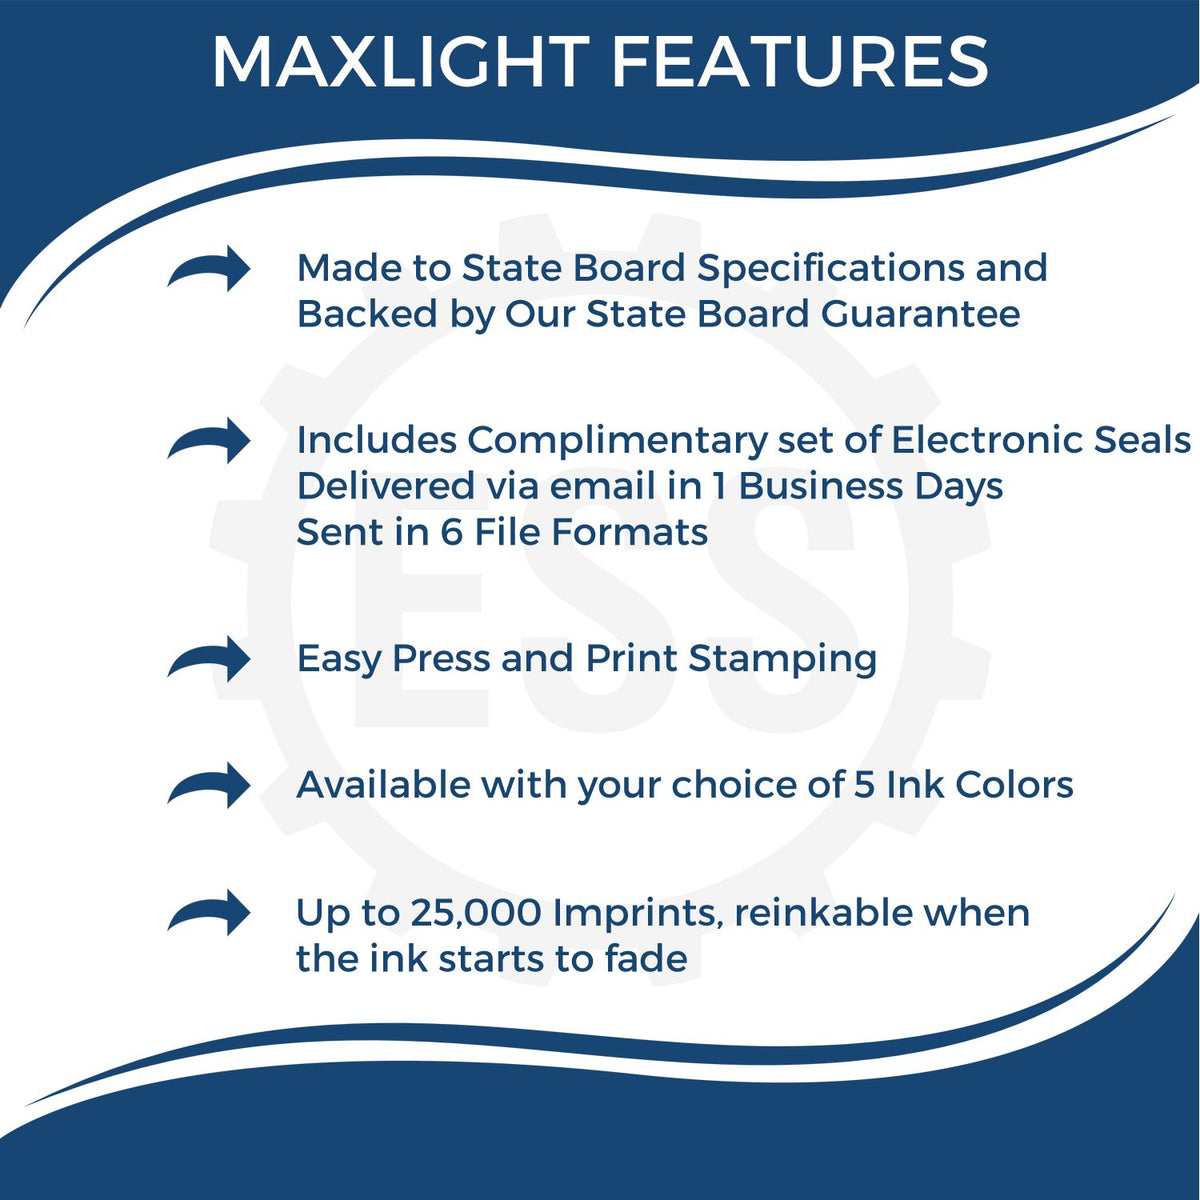 A picture of an infographic highlighting the selling points for the Premium MaxLight Pre-Inked Arizona Geology Stamp